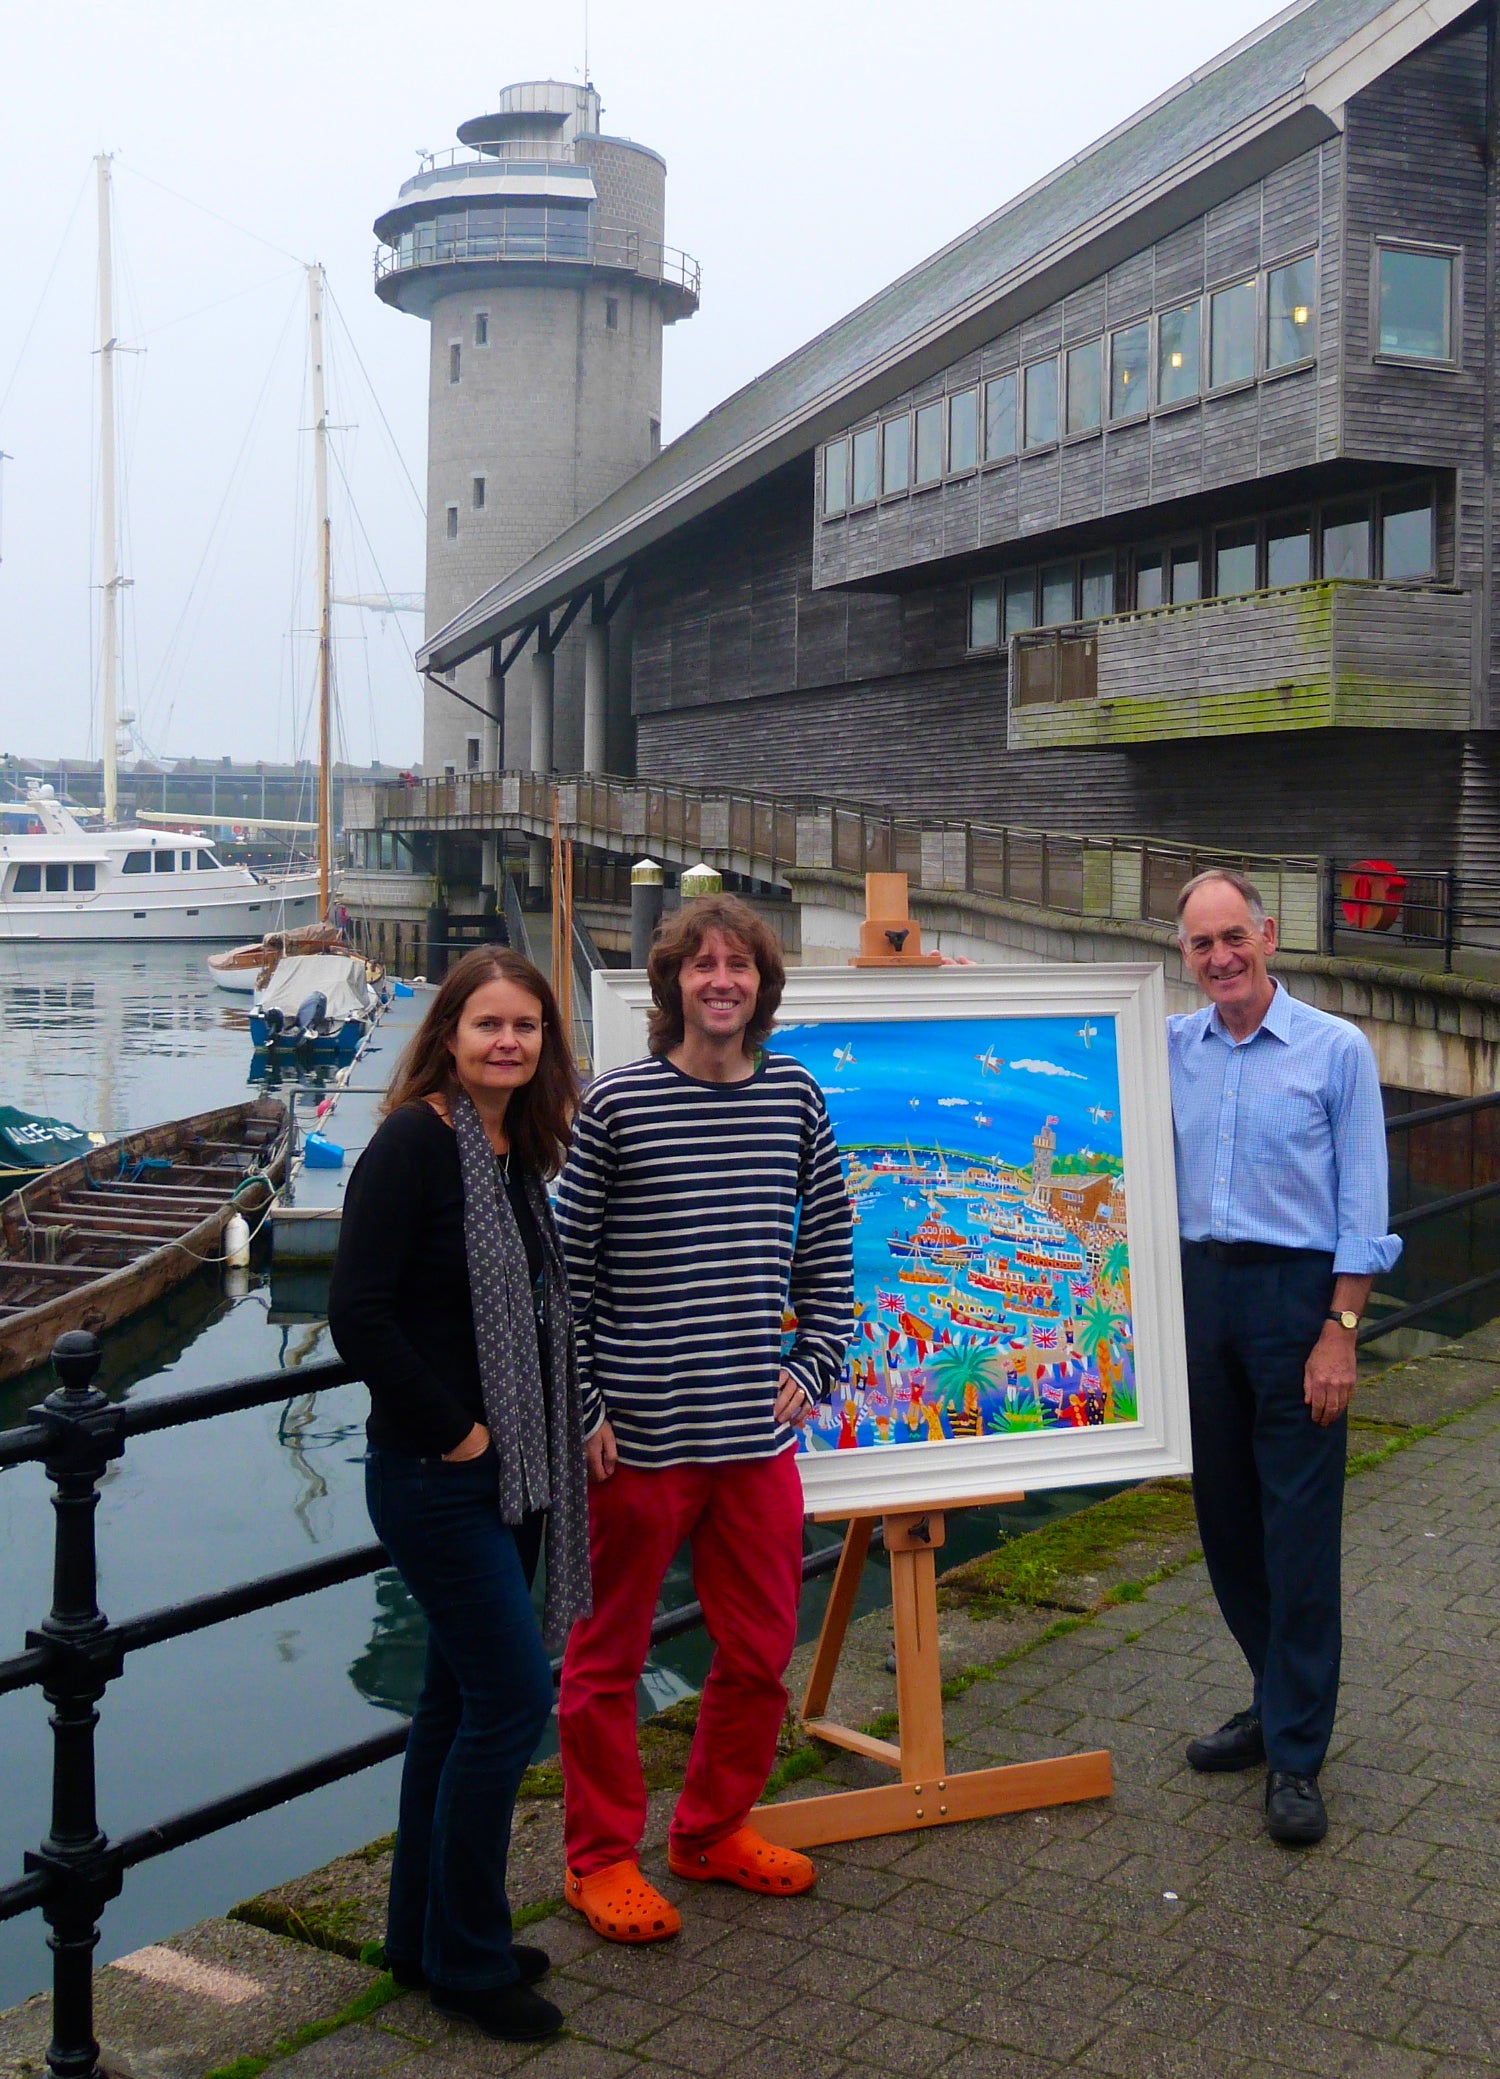 John Dyer appointed as the Artist in Residence for the Falmouth to Royal Greenwich Tall Ships Regatta 2014